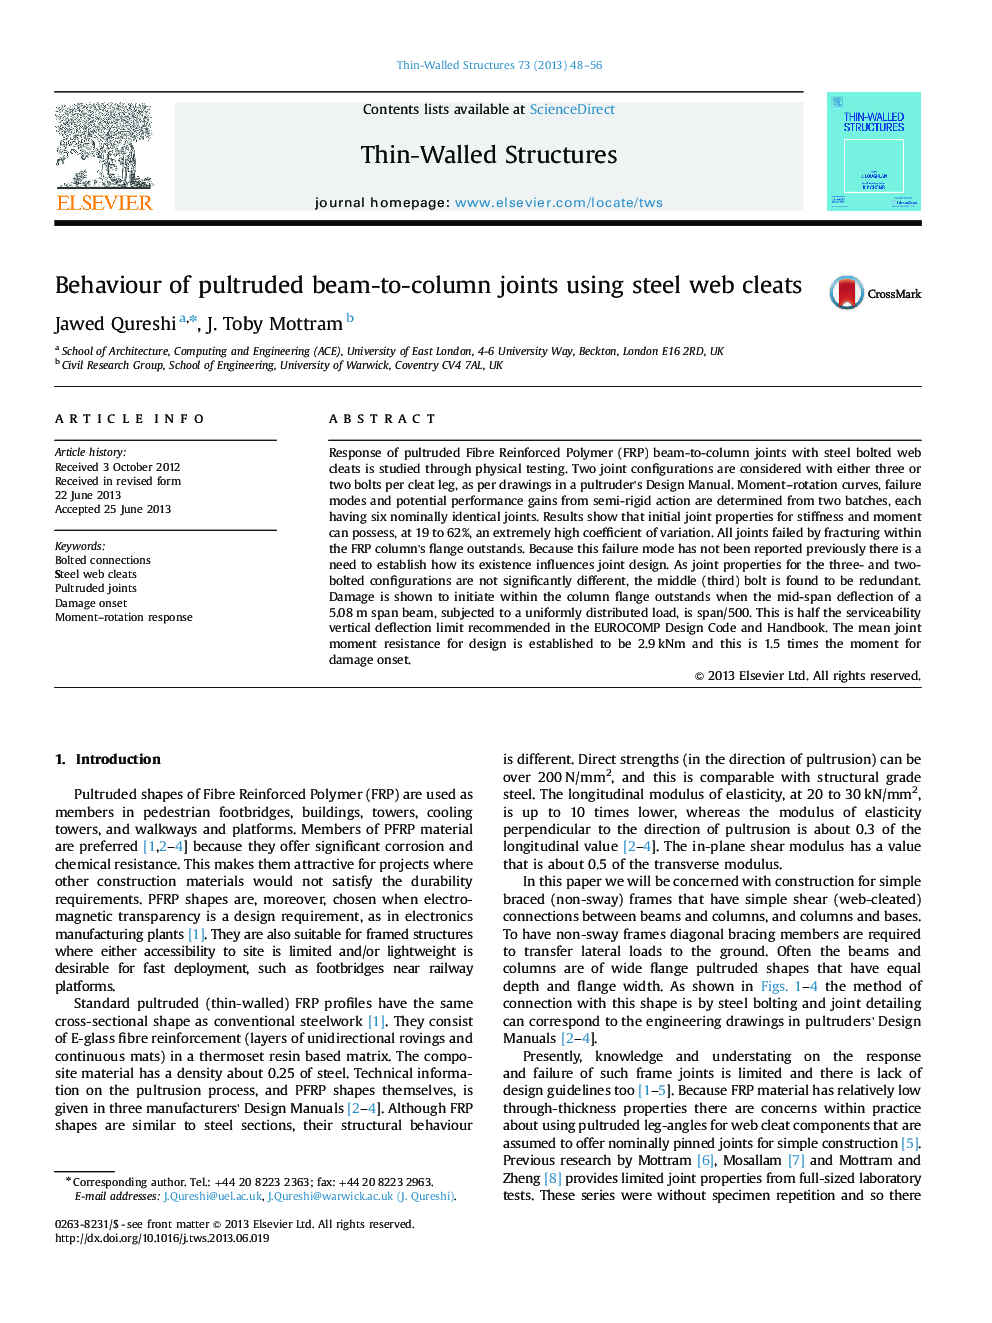 Behaviour of pultruded beam-to-column joints using steel web cleats